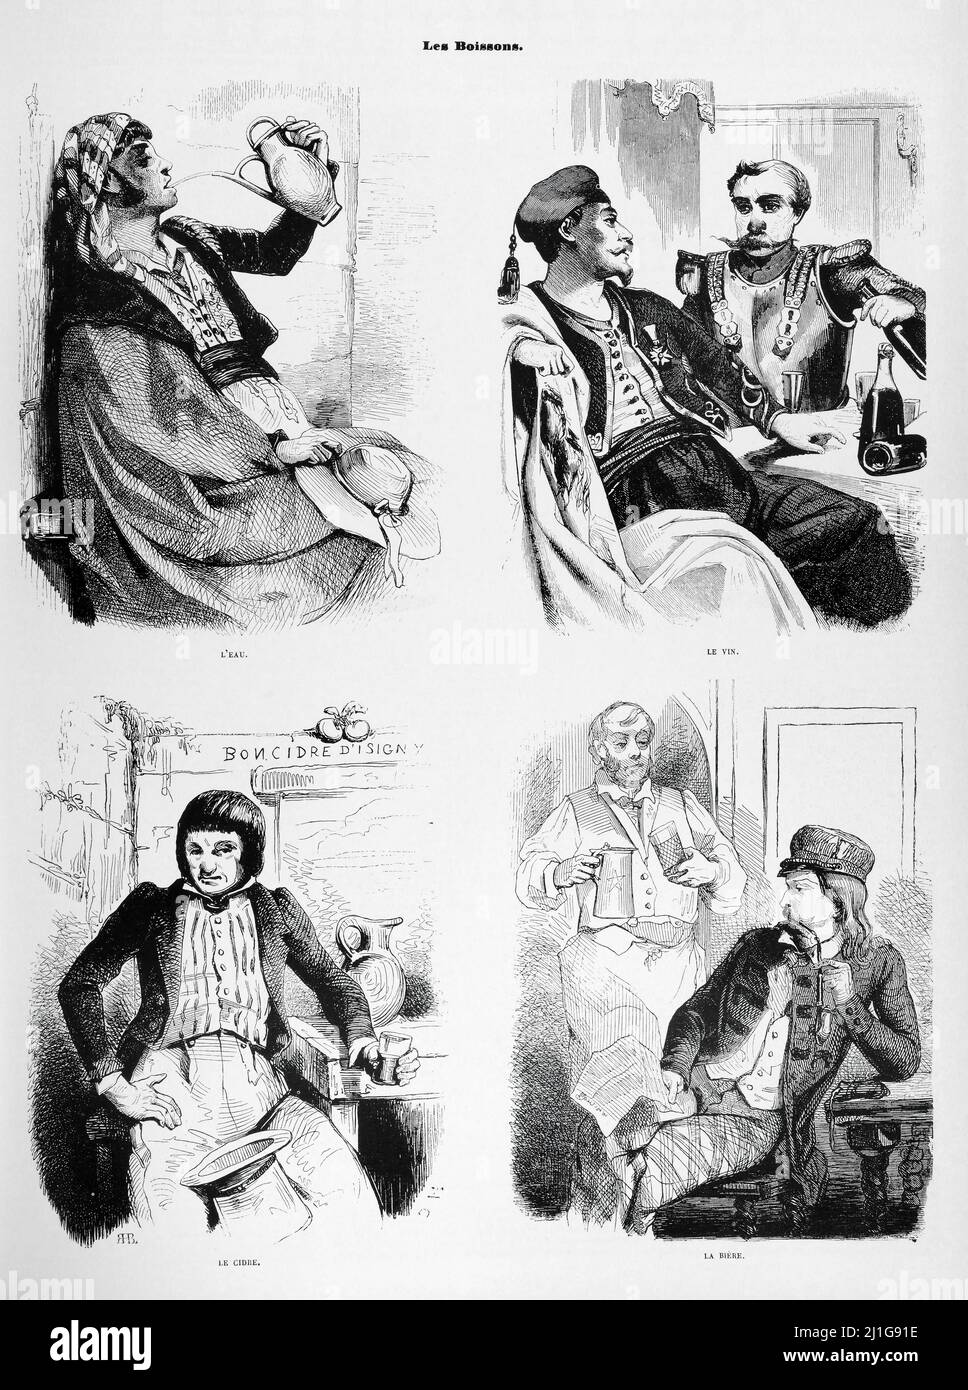 Eng translation : ' ' Drinks. WINE. THE WATER. BEER CIDER, ' ' - Original in French : ' Les Boissons. LE VIN. L'EAU. LA BIÈRE LE CIDRE, ' - Extract from 'L'Illustration Journal Universel' - French illustrated magazine - 1846 Stock Photo